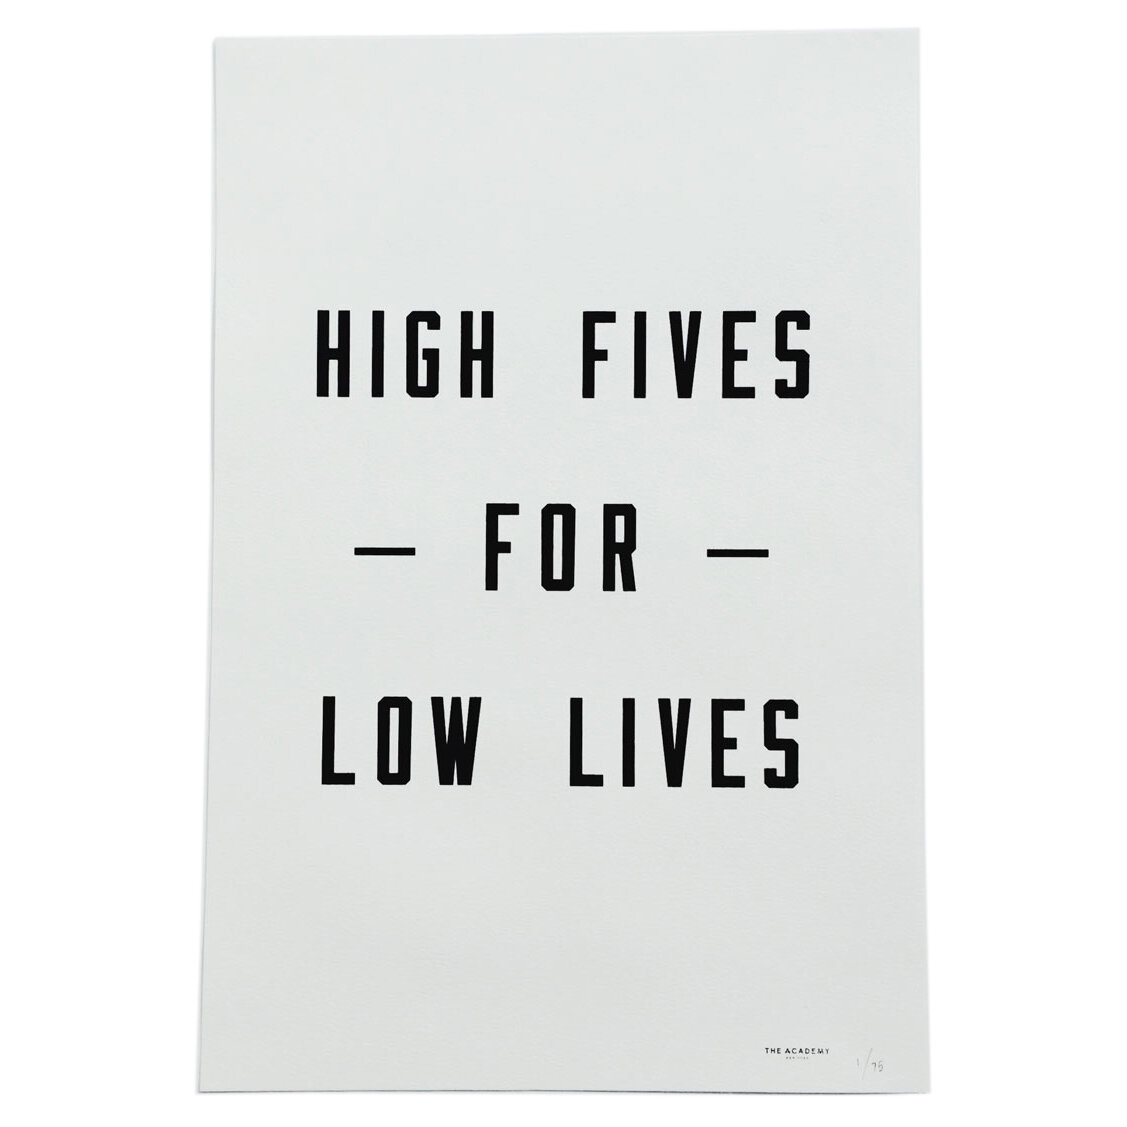 High_Fives_For_Low_Lives-Print-The_Academy_NY-cdr.jpg